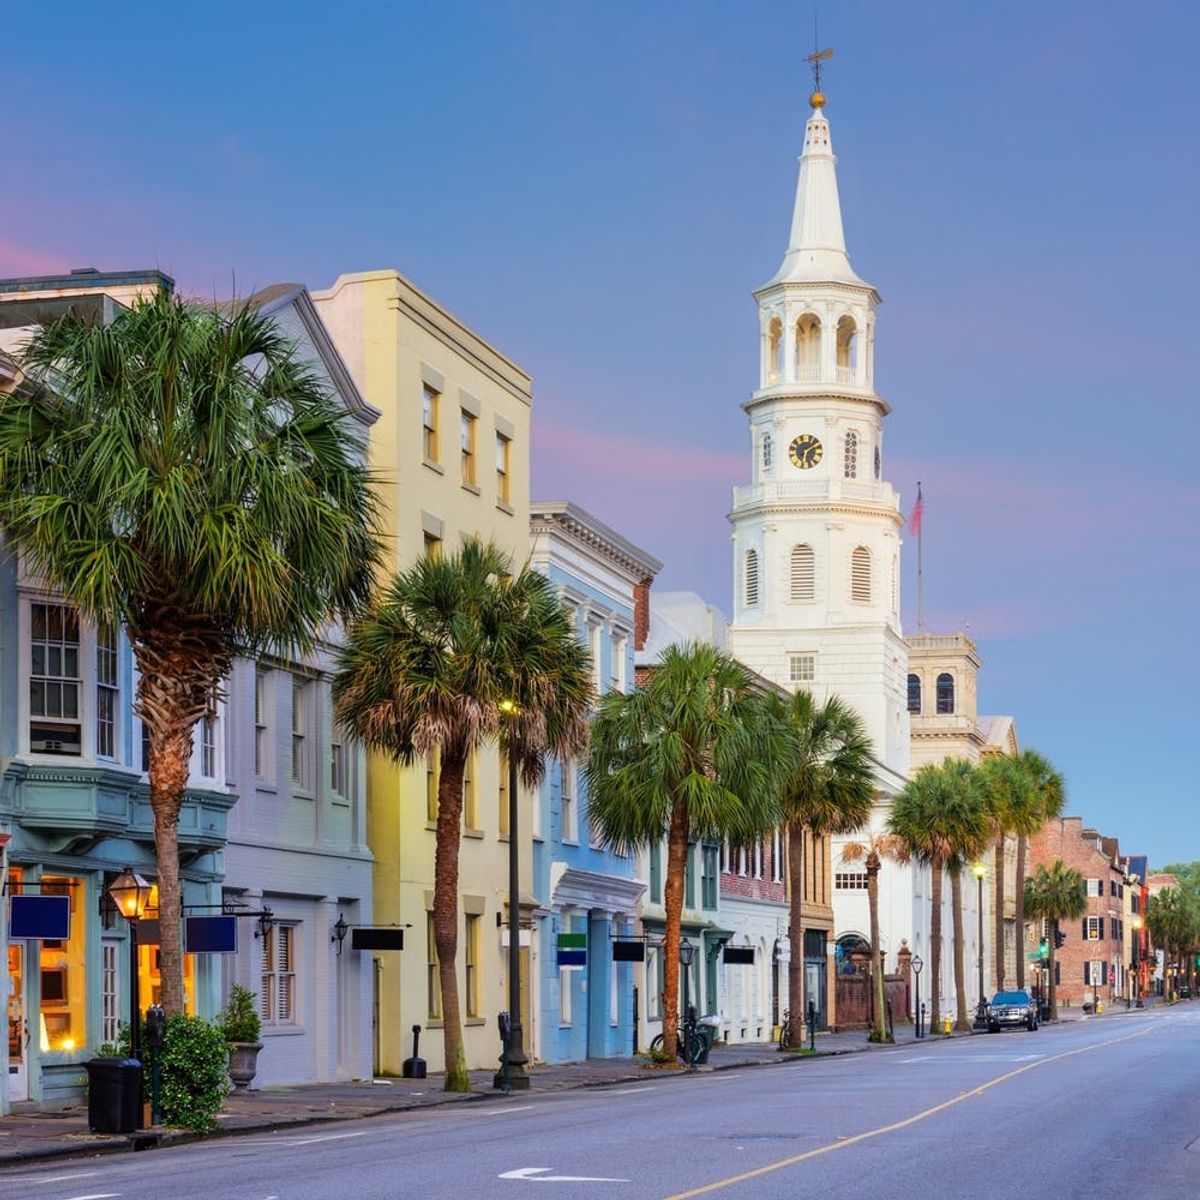 7 US Cities to Visit for a Dose of Southern Charm